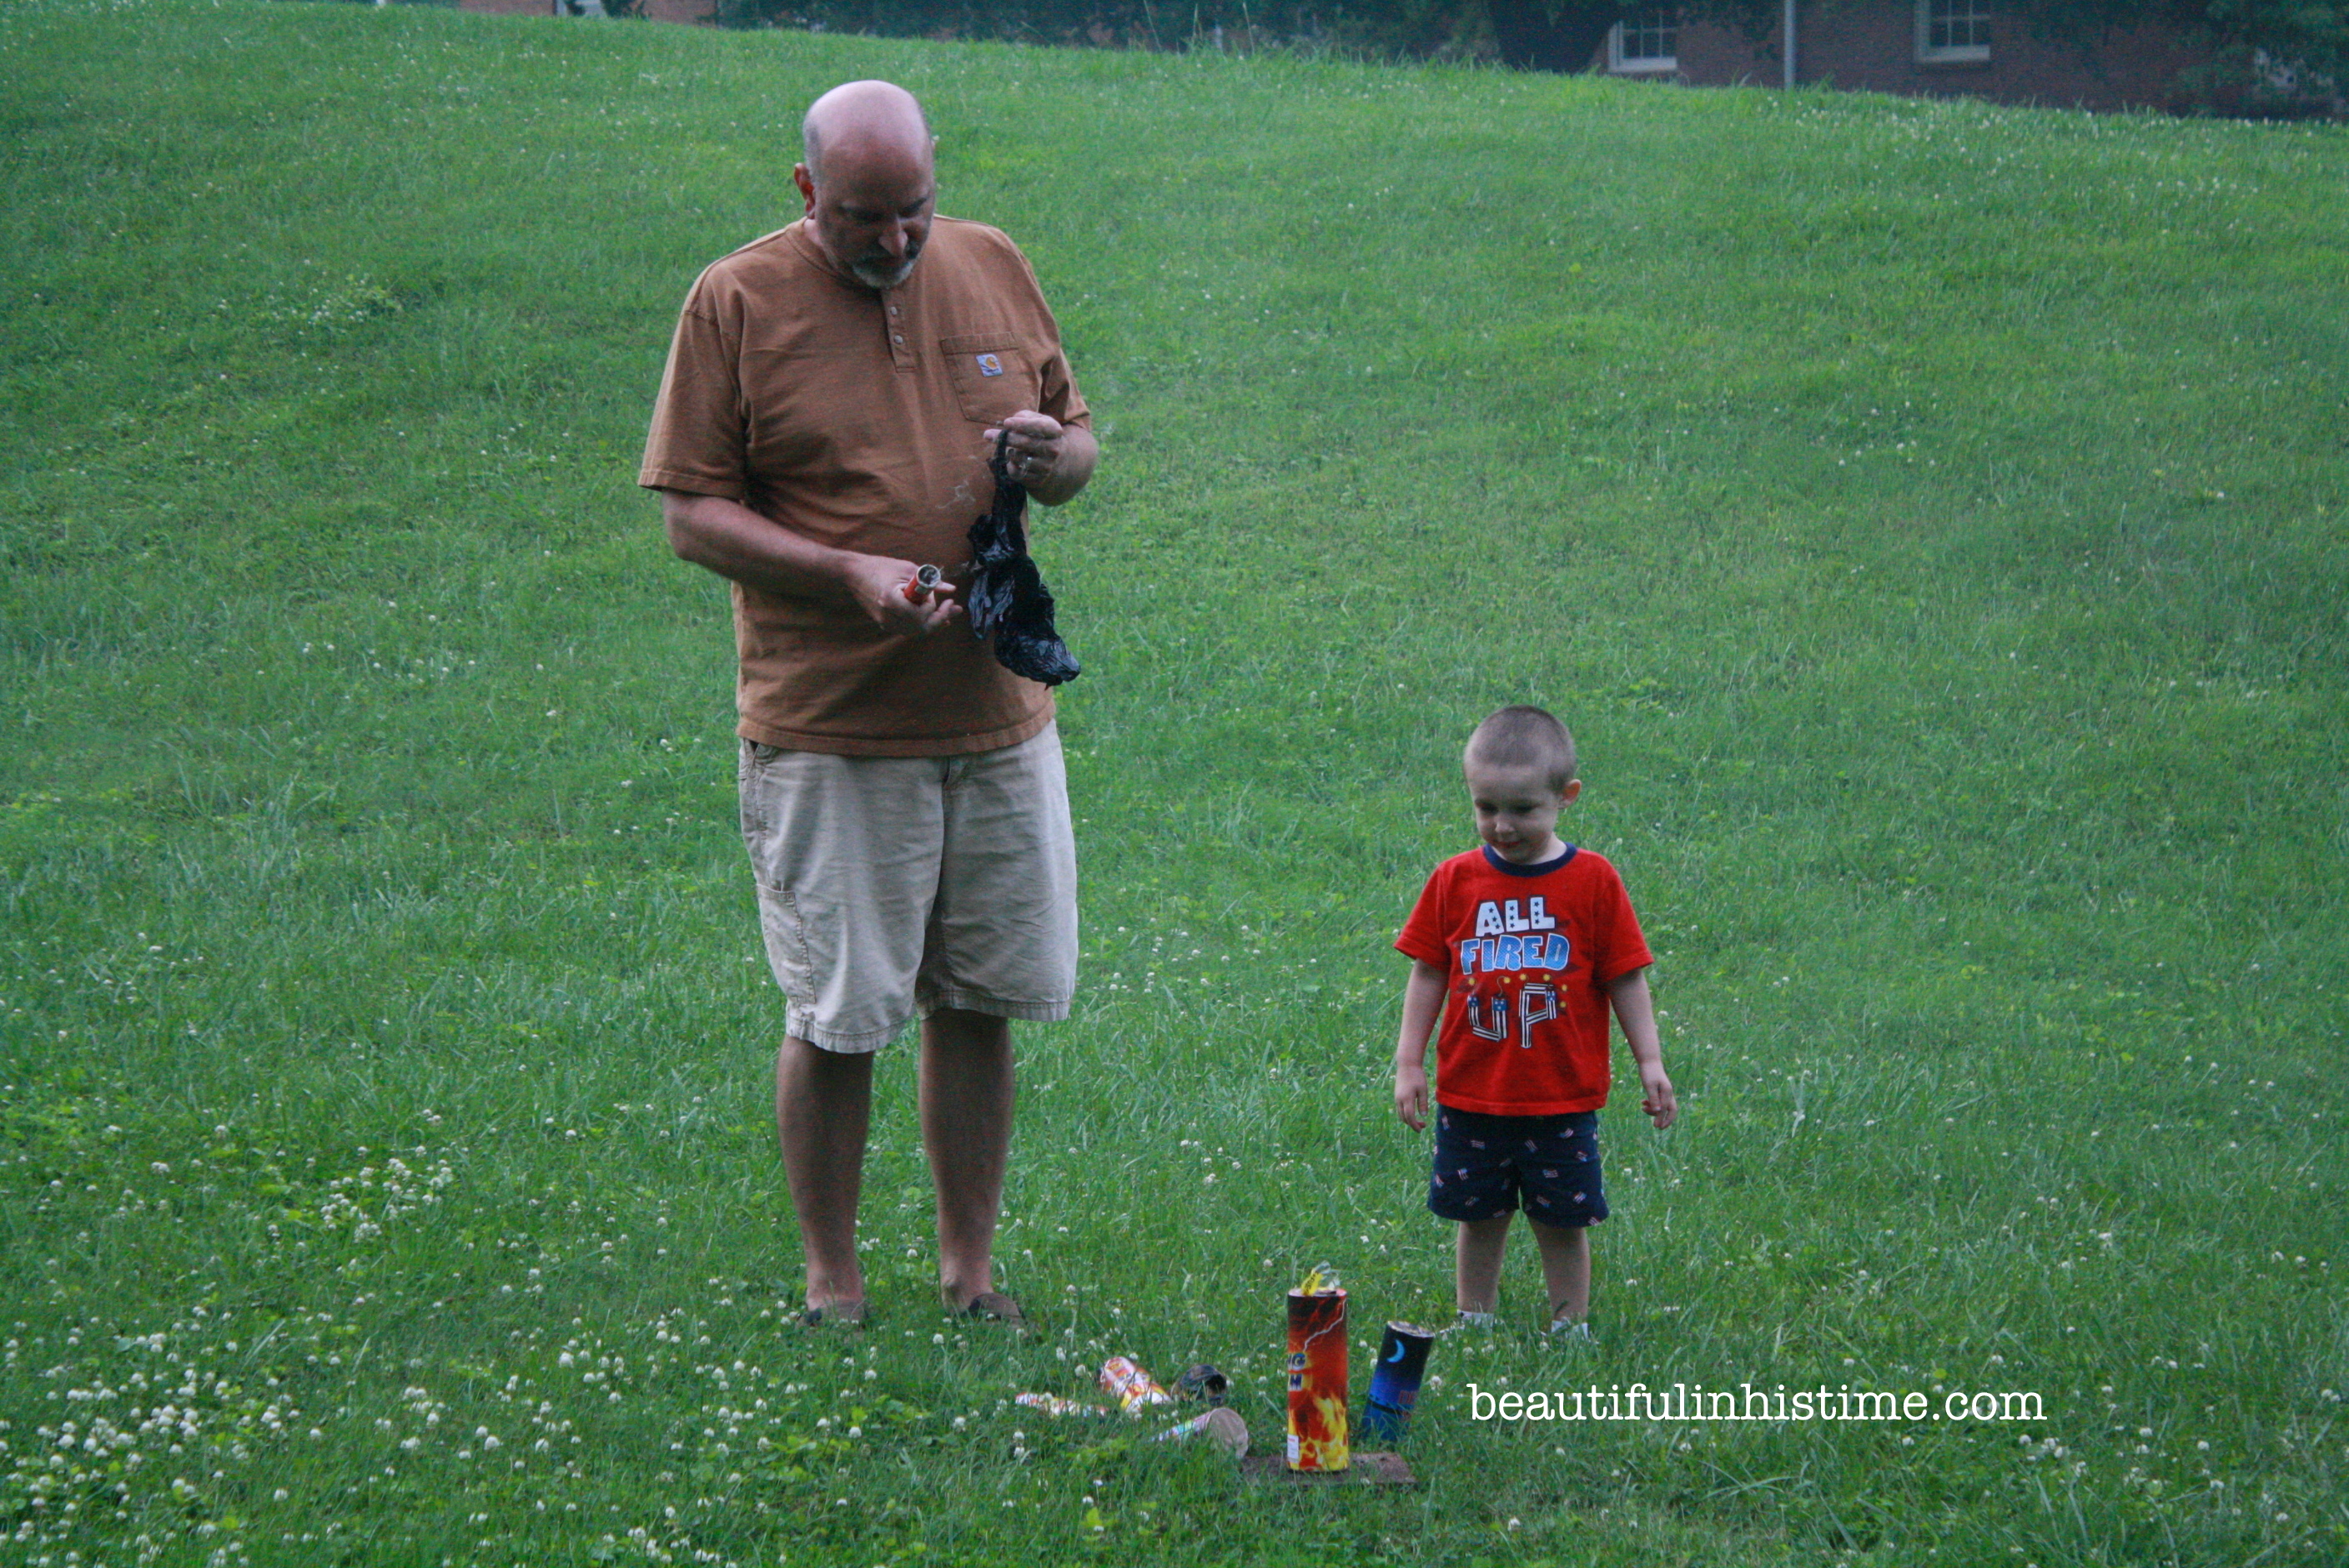 fireworks with grandpa A Birthday Party for America! #birthday #america #4thofjuly #independenceday #party #birthdayparty #fireworks